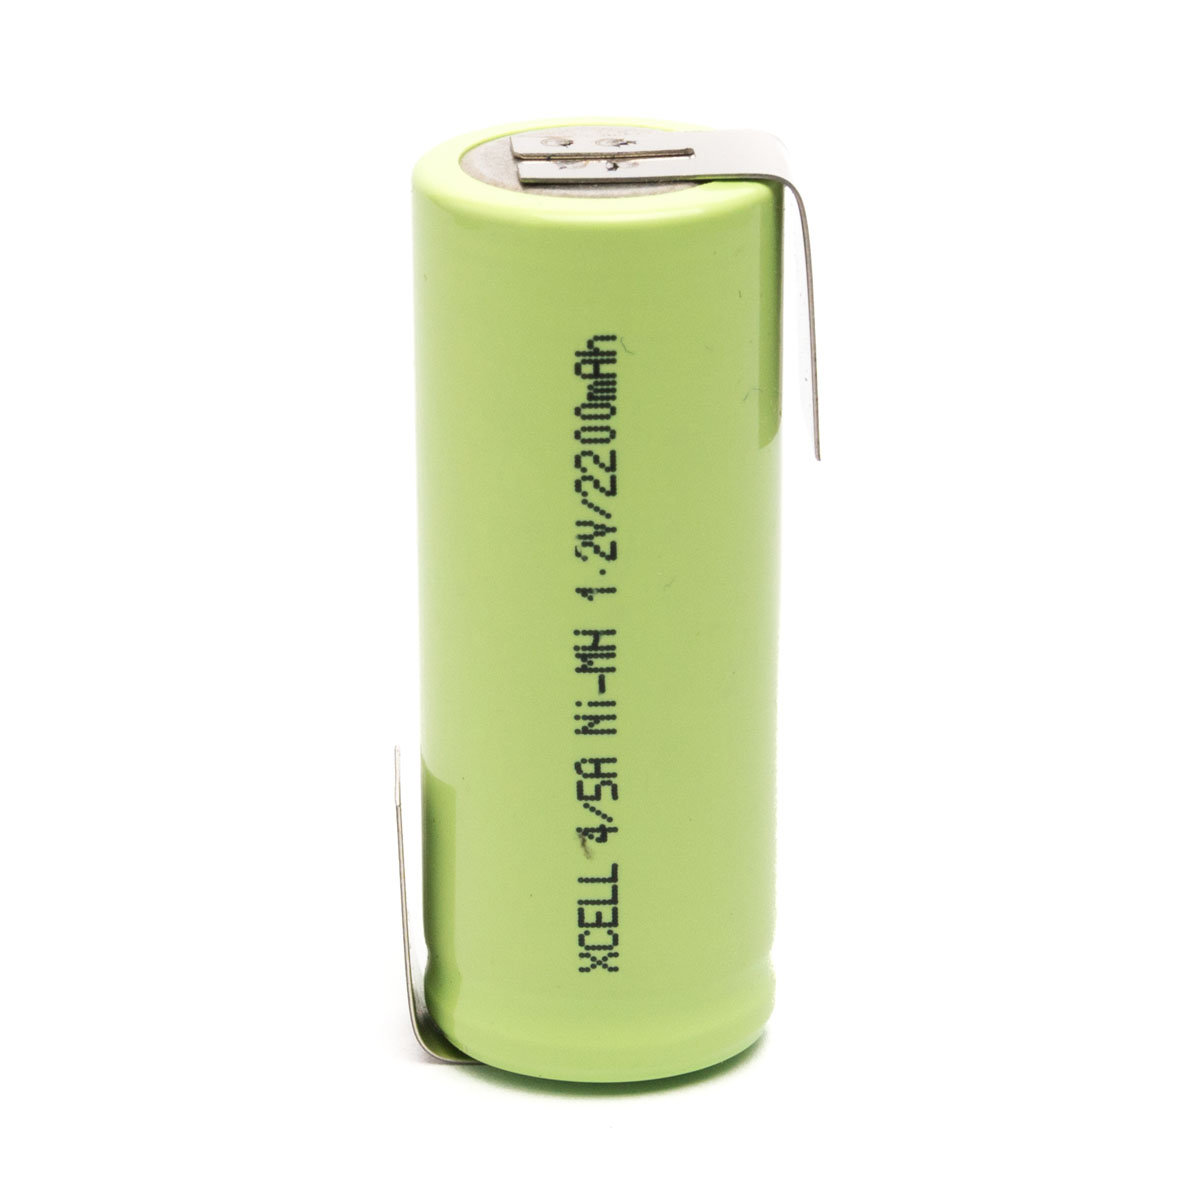 D NiMH Rechargeable Battery with Solder Tabs